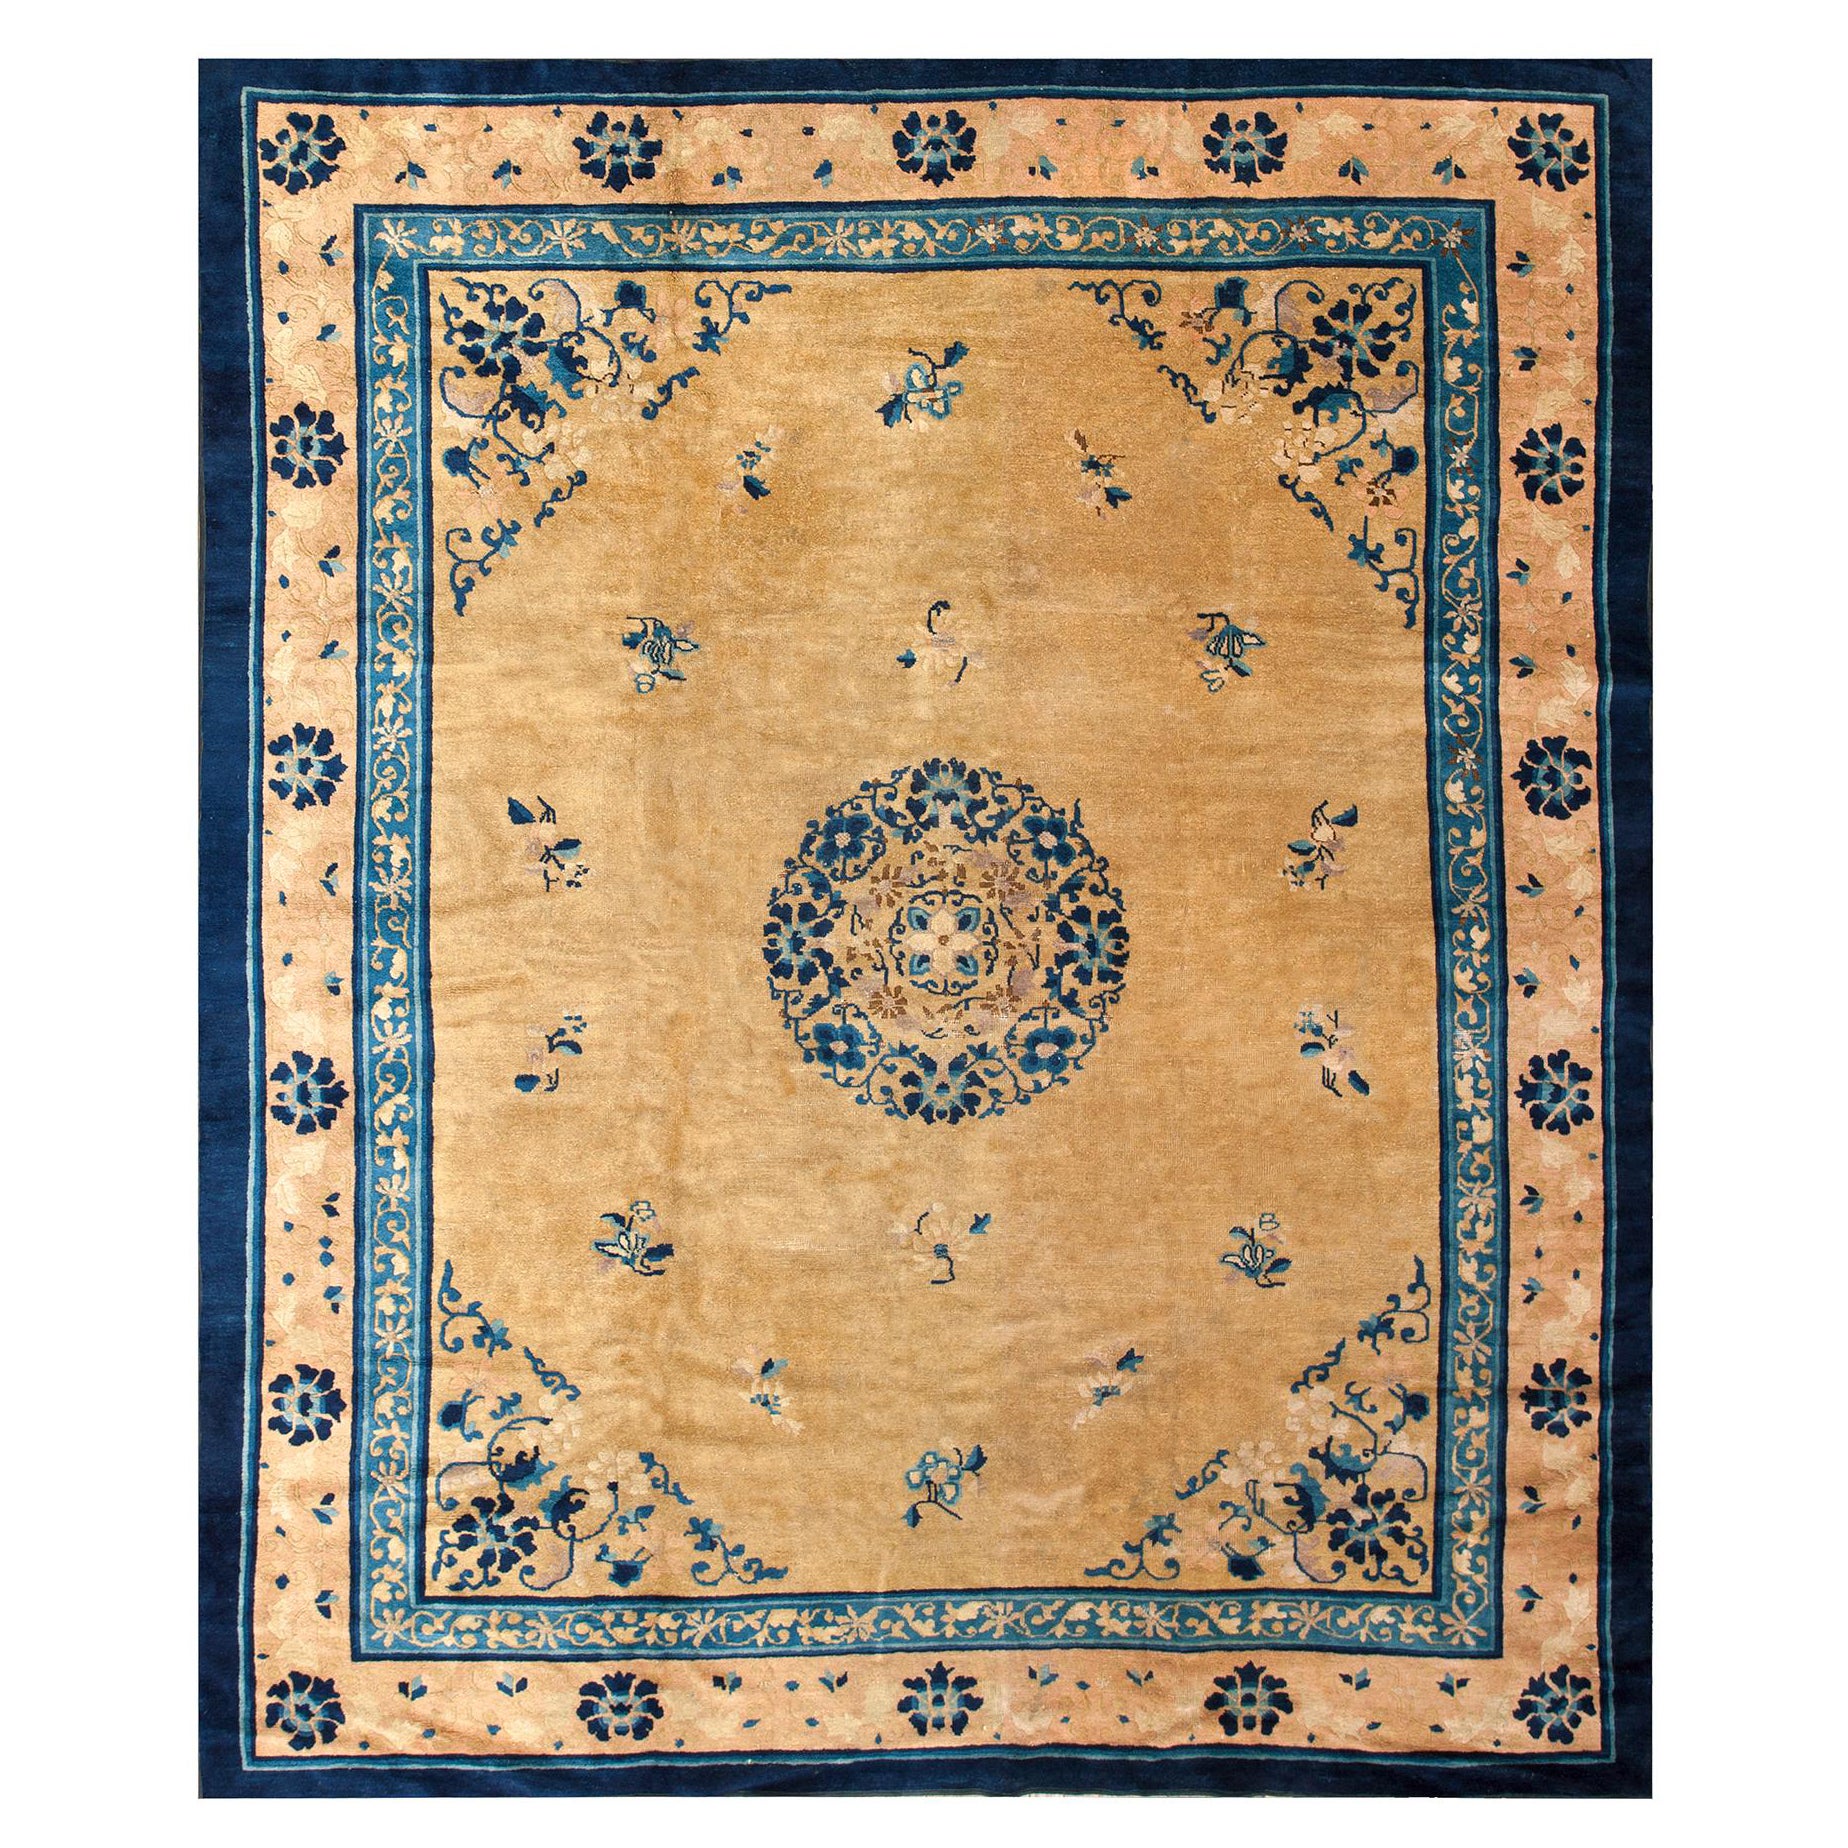 Earl;y 20th Century Chinese Peking Carpet ( 8'2" x 9'9" - 250 x 300 ) For Sale